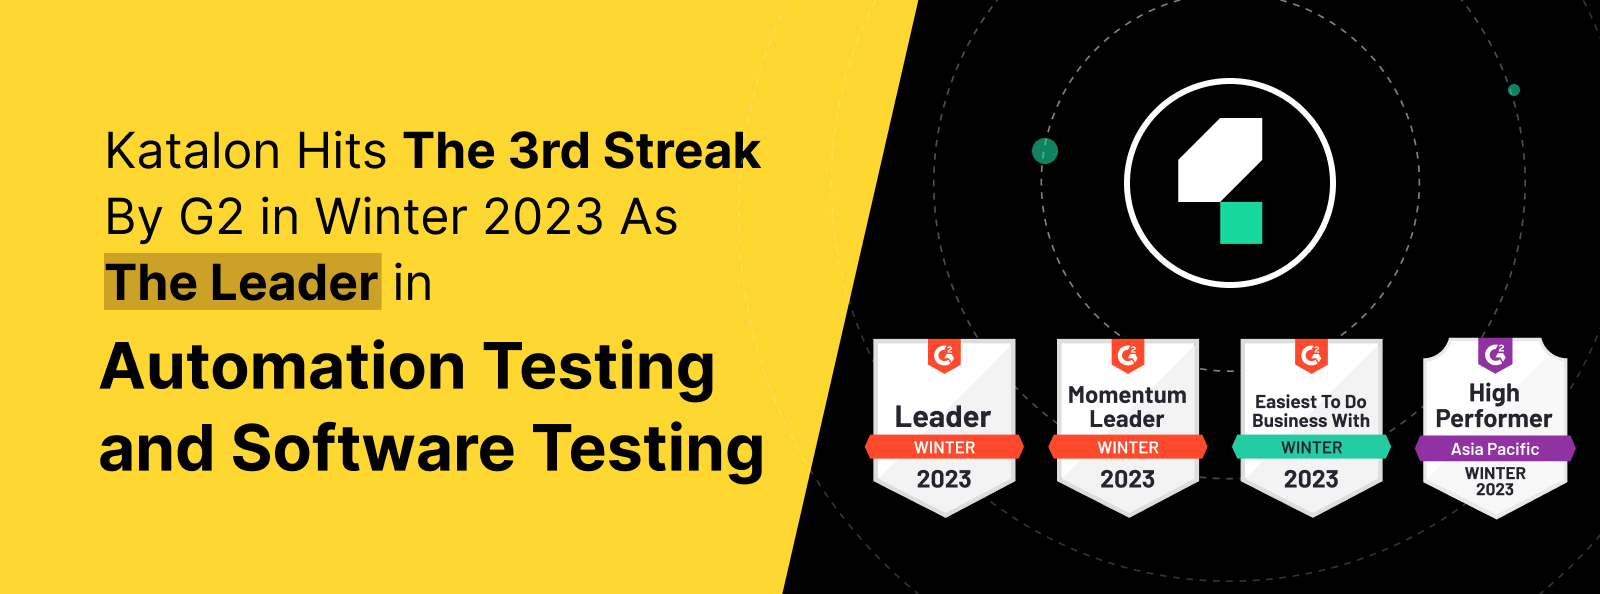 Katalon 3rd Streak As The Automation Testing Leader By G2